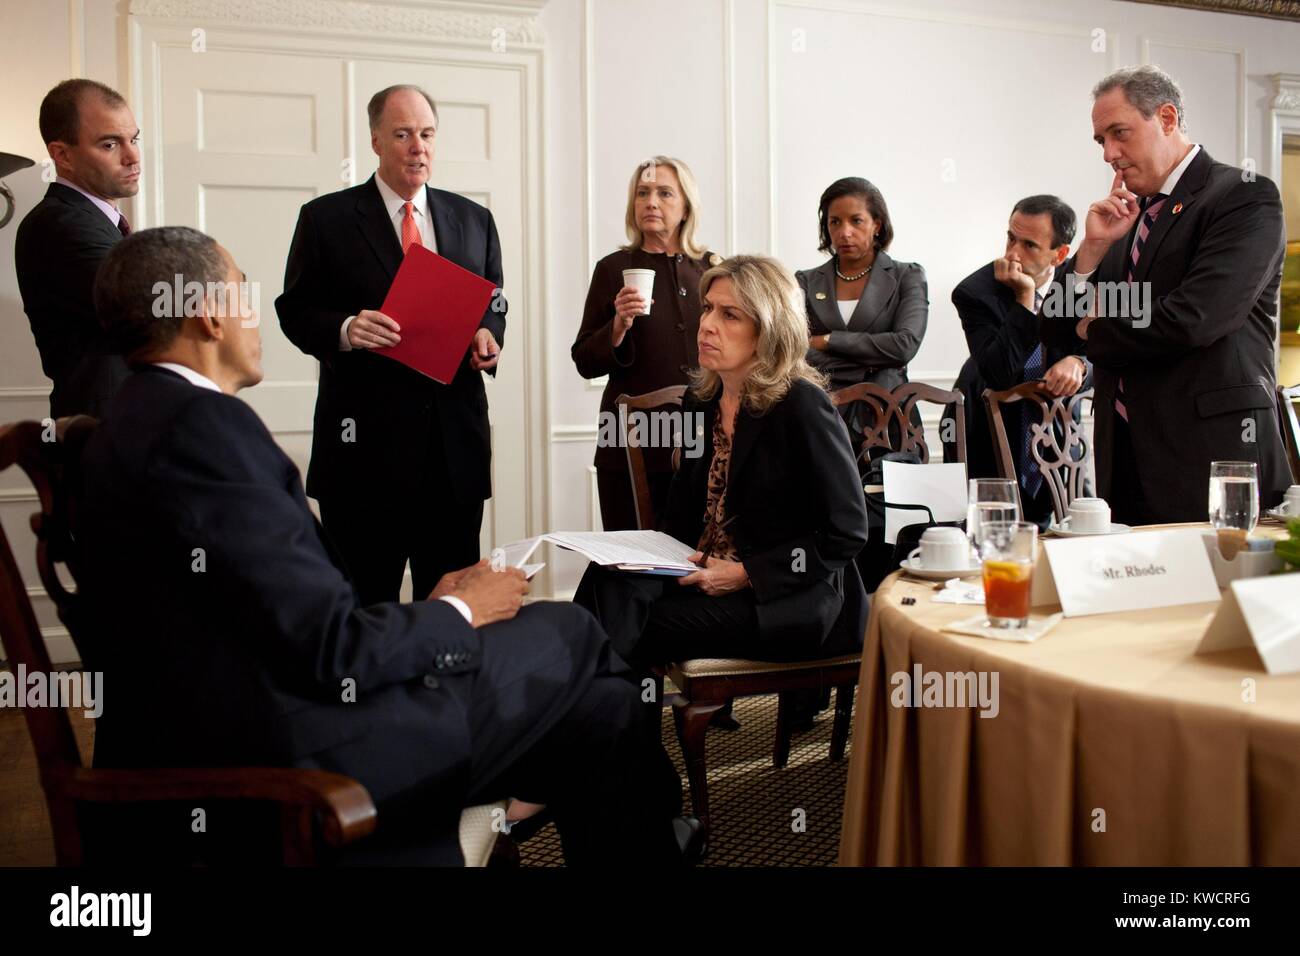 President Barack Obama meets with advisors before a meeting with PM David Cameron of Britain. Waldorf Astoria Hotel in New York, N.Y., Sept. 21, 2011. From left: Ben Rhodes, Deputy NSA; NSA Tom Donilon; Sec. of State Hillary Rodham Clinton; Liz Sherwood-Randall, NSC Sr. Dir. For European Affairs; Susan Rice, U.S. Ambassador to the UN; Phil Gordon, Assist. Sec. of State for European and Eurasian Affairs; and Michael Froman, Deputy NSA of Economic Affairs. (BSLOC 2015 3 213) Stock Photo